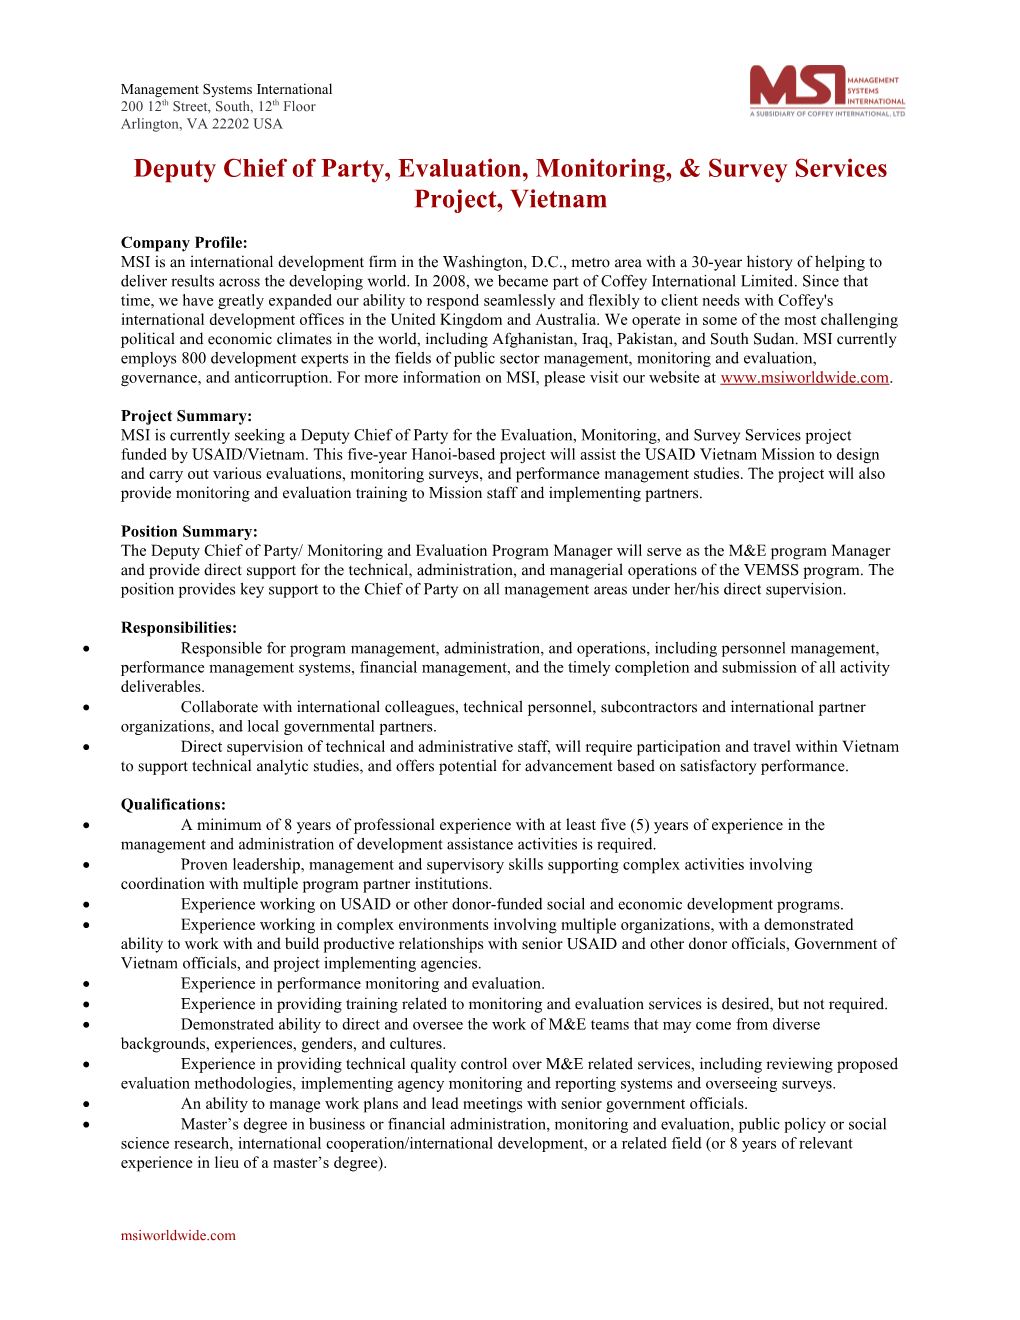 Deputy Chief of Party, Evaluation, Monitoring, & Survey Services Project, Vietnam